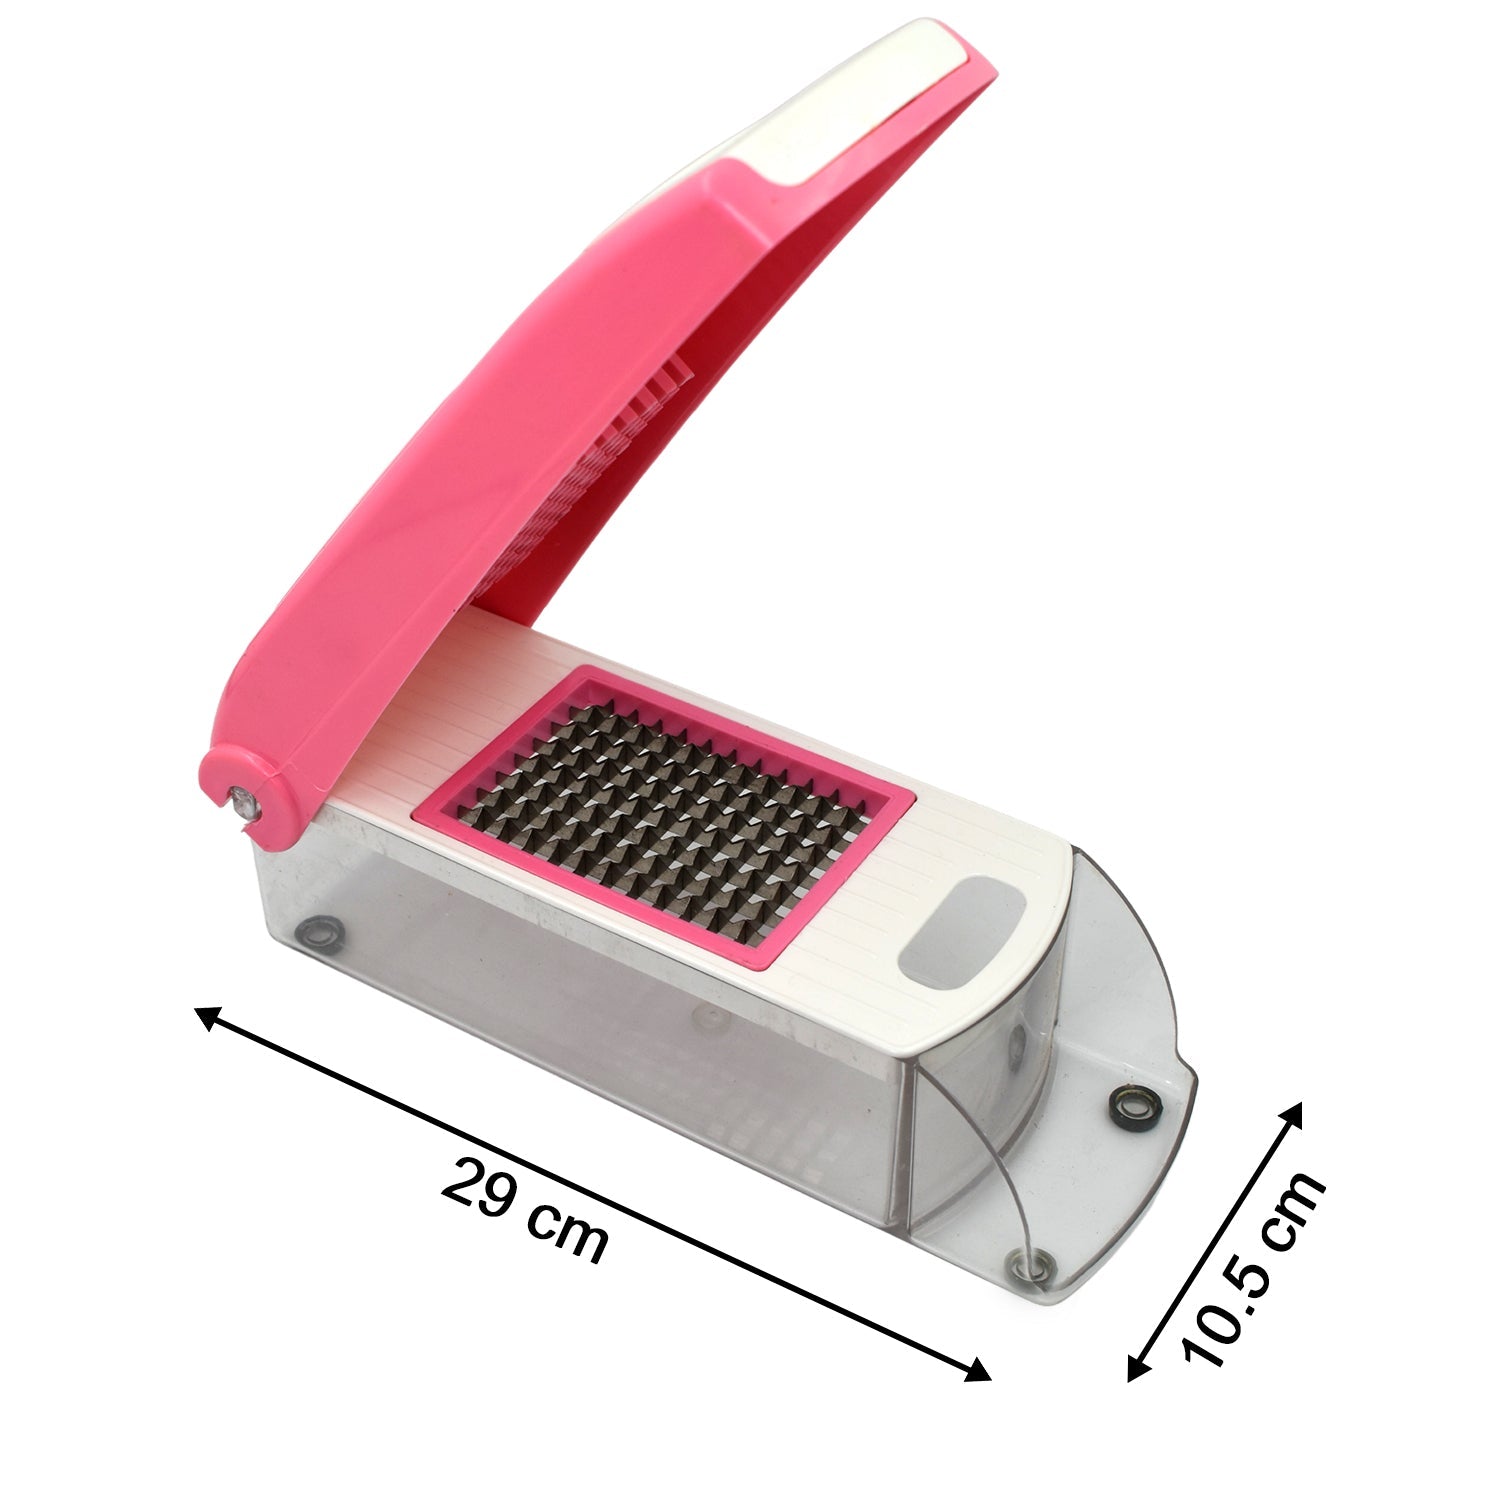 2199B 12In1 Veg Cutter Used To Cut Vegetables Easily In All Kinds Of Places.